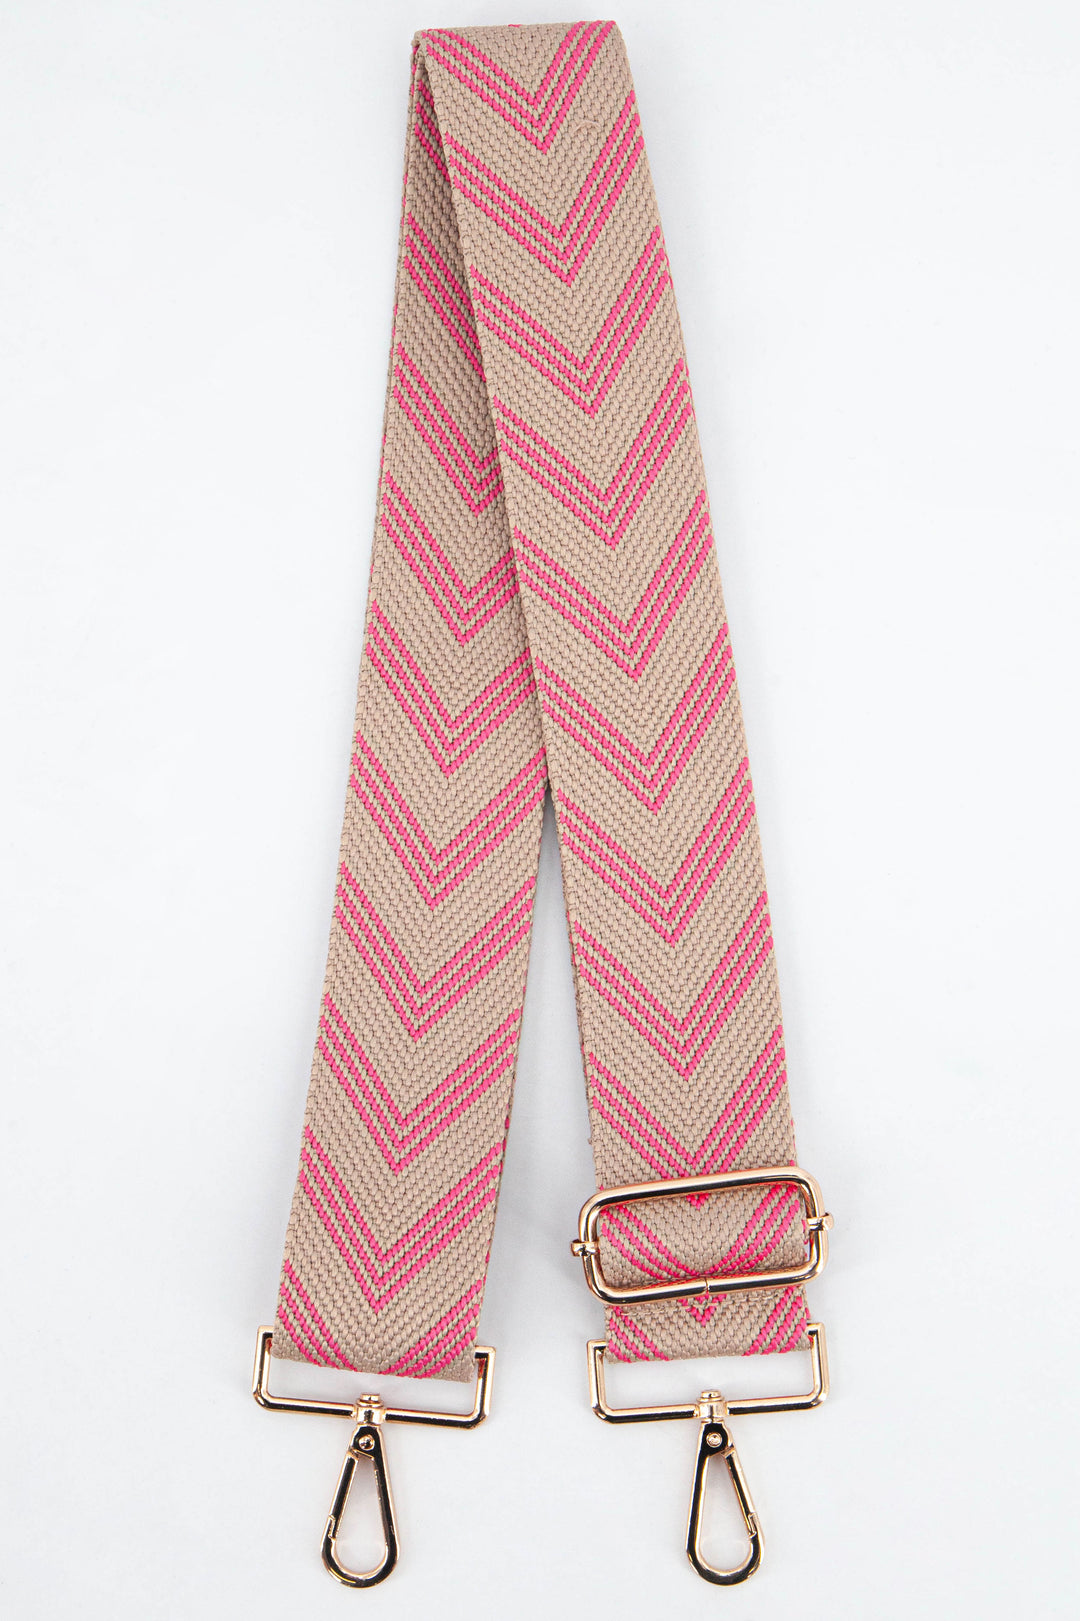 pink and beige woven chevron pattern adjustable bag strap with gold snap hook attachments